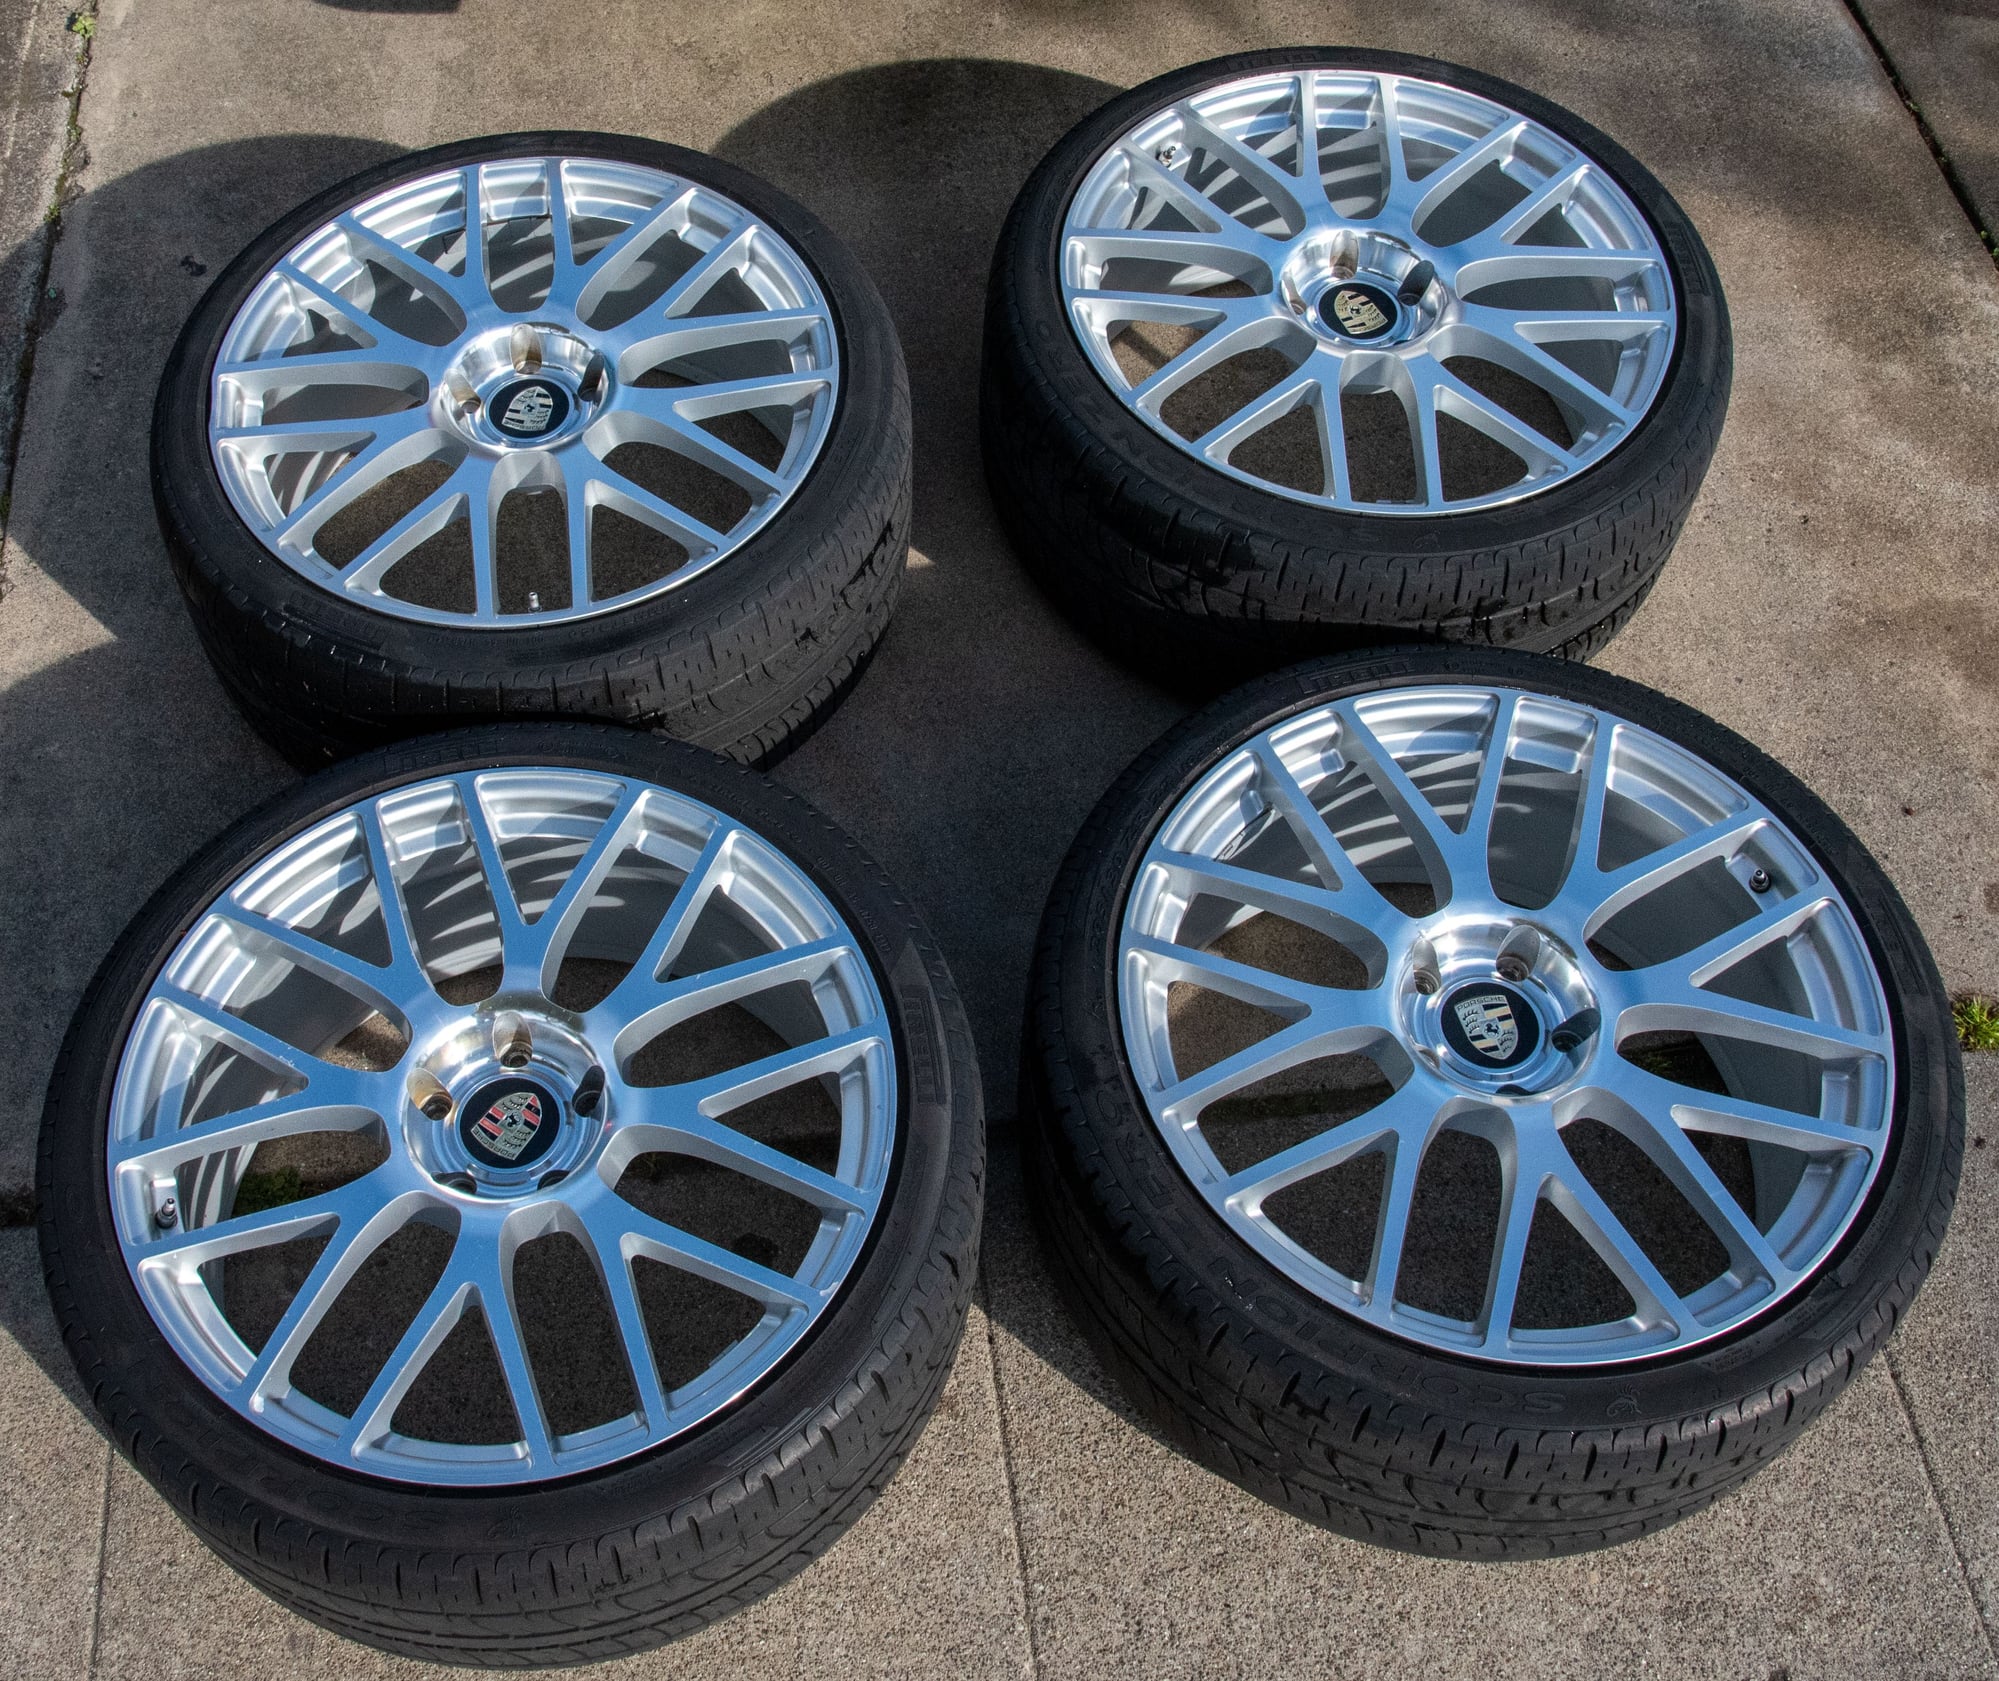 Wheels and Tires/Axles - 5 Victor Innsbruck 22" x 10.5" Wheels (4 worn tires optional) - Used - 2011 to 2018 Porsche Cayenne - San Jose, CA 95130, United States